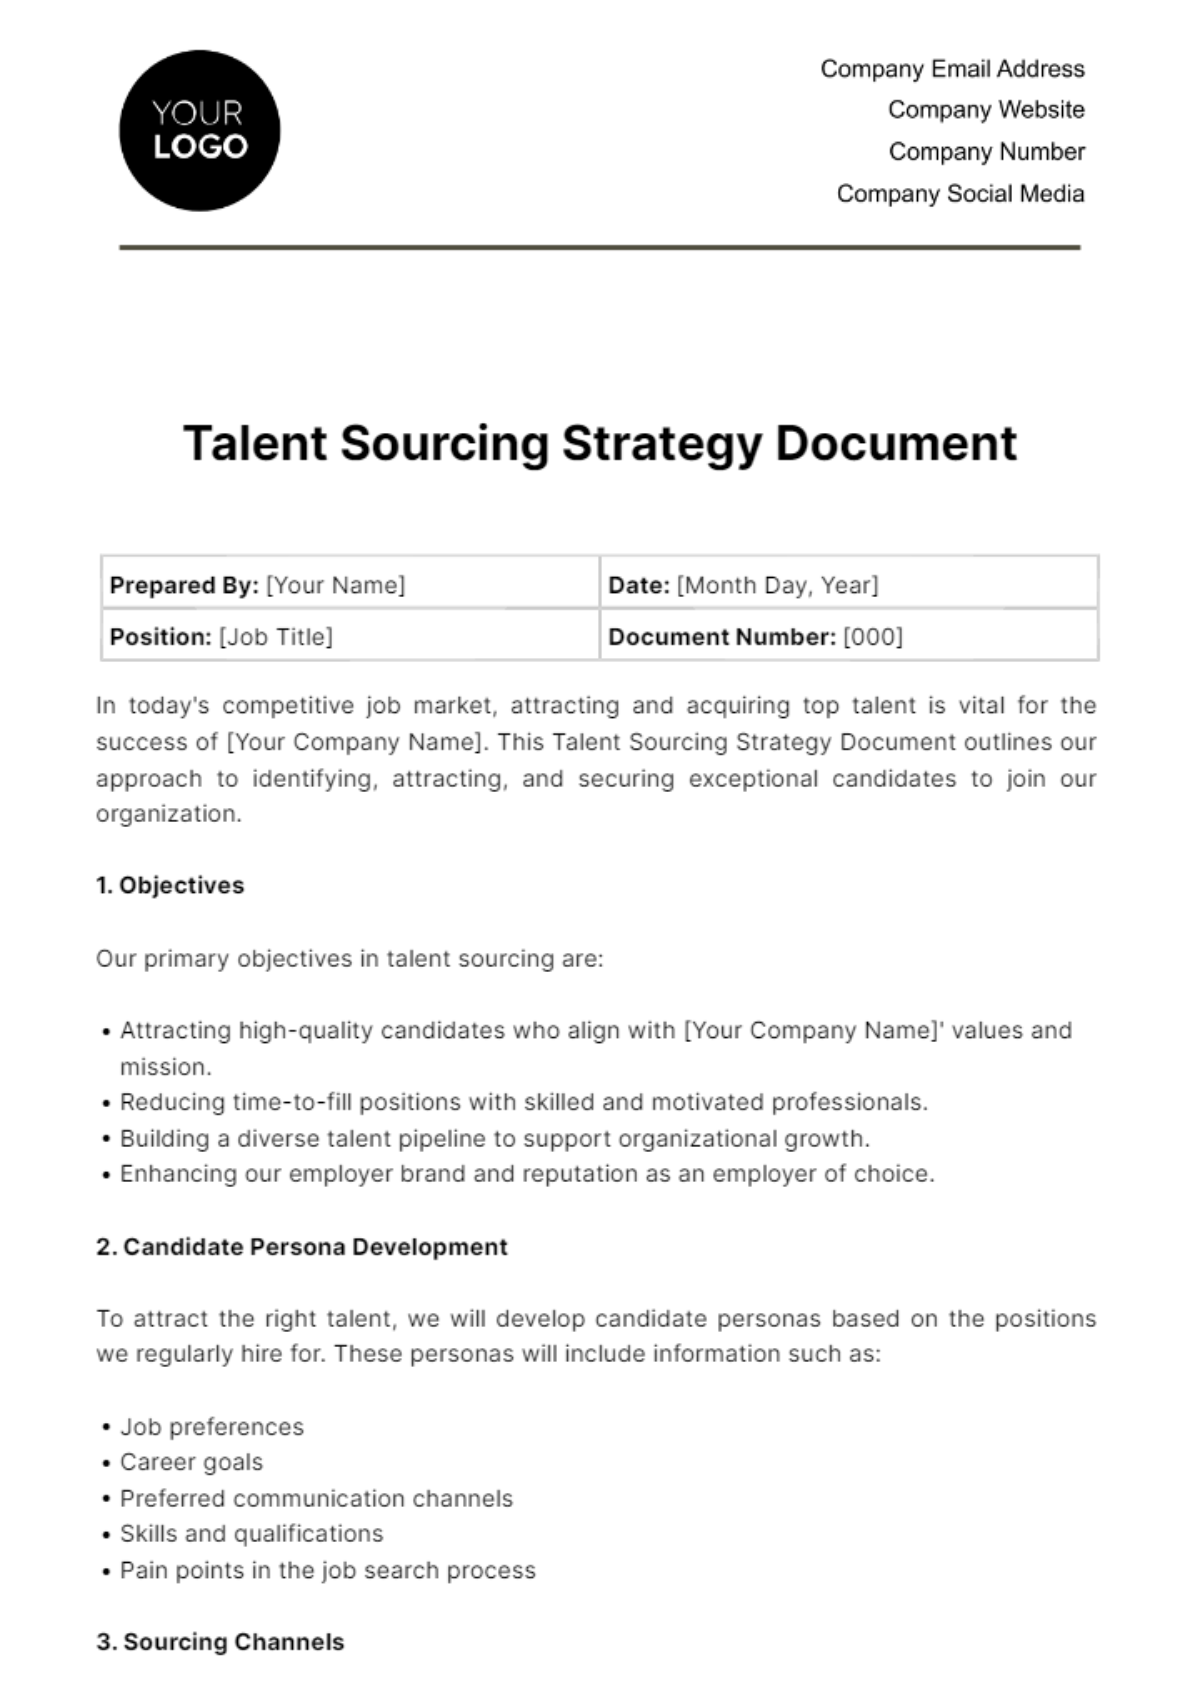 Free Talent Sourcing Strategy Document HR Template